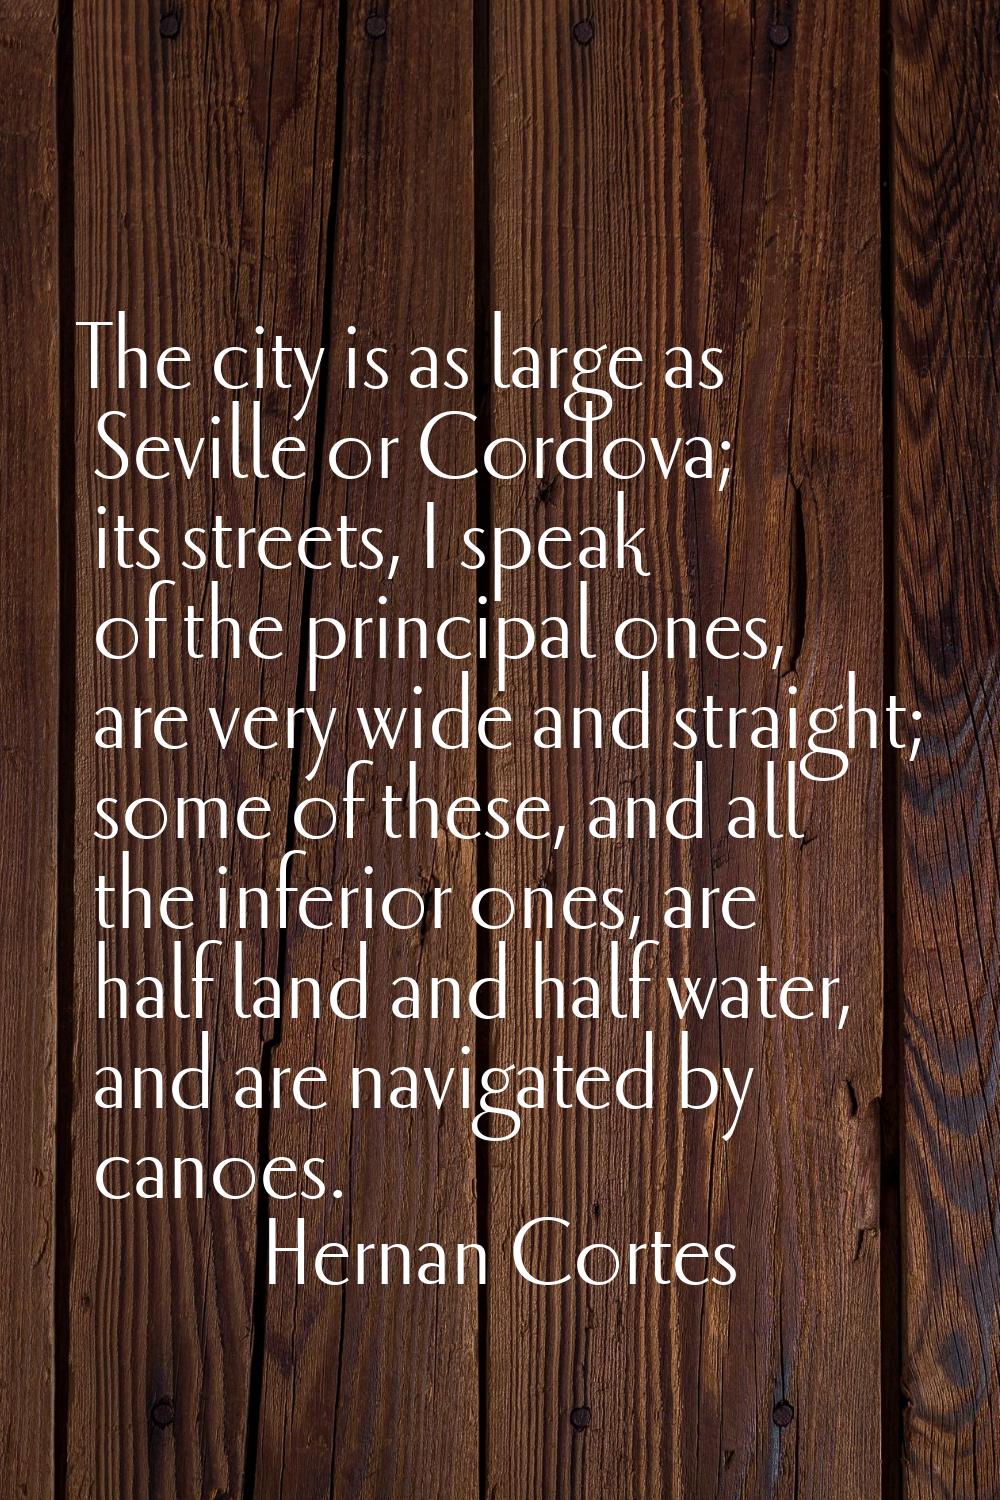 The city is as large as Seville or Cordova; its streets, I speak of the principal ones, are very wi